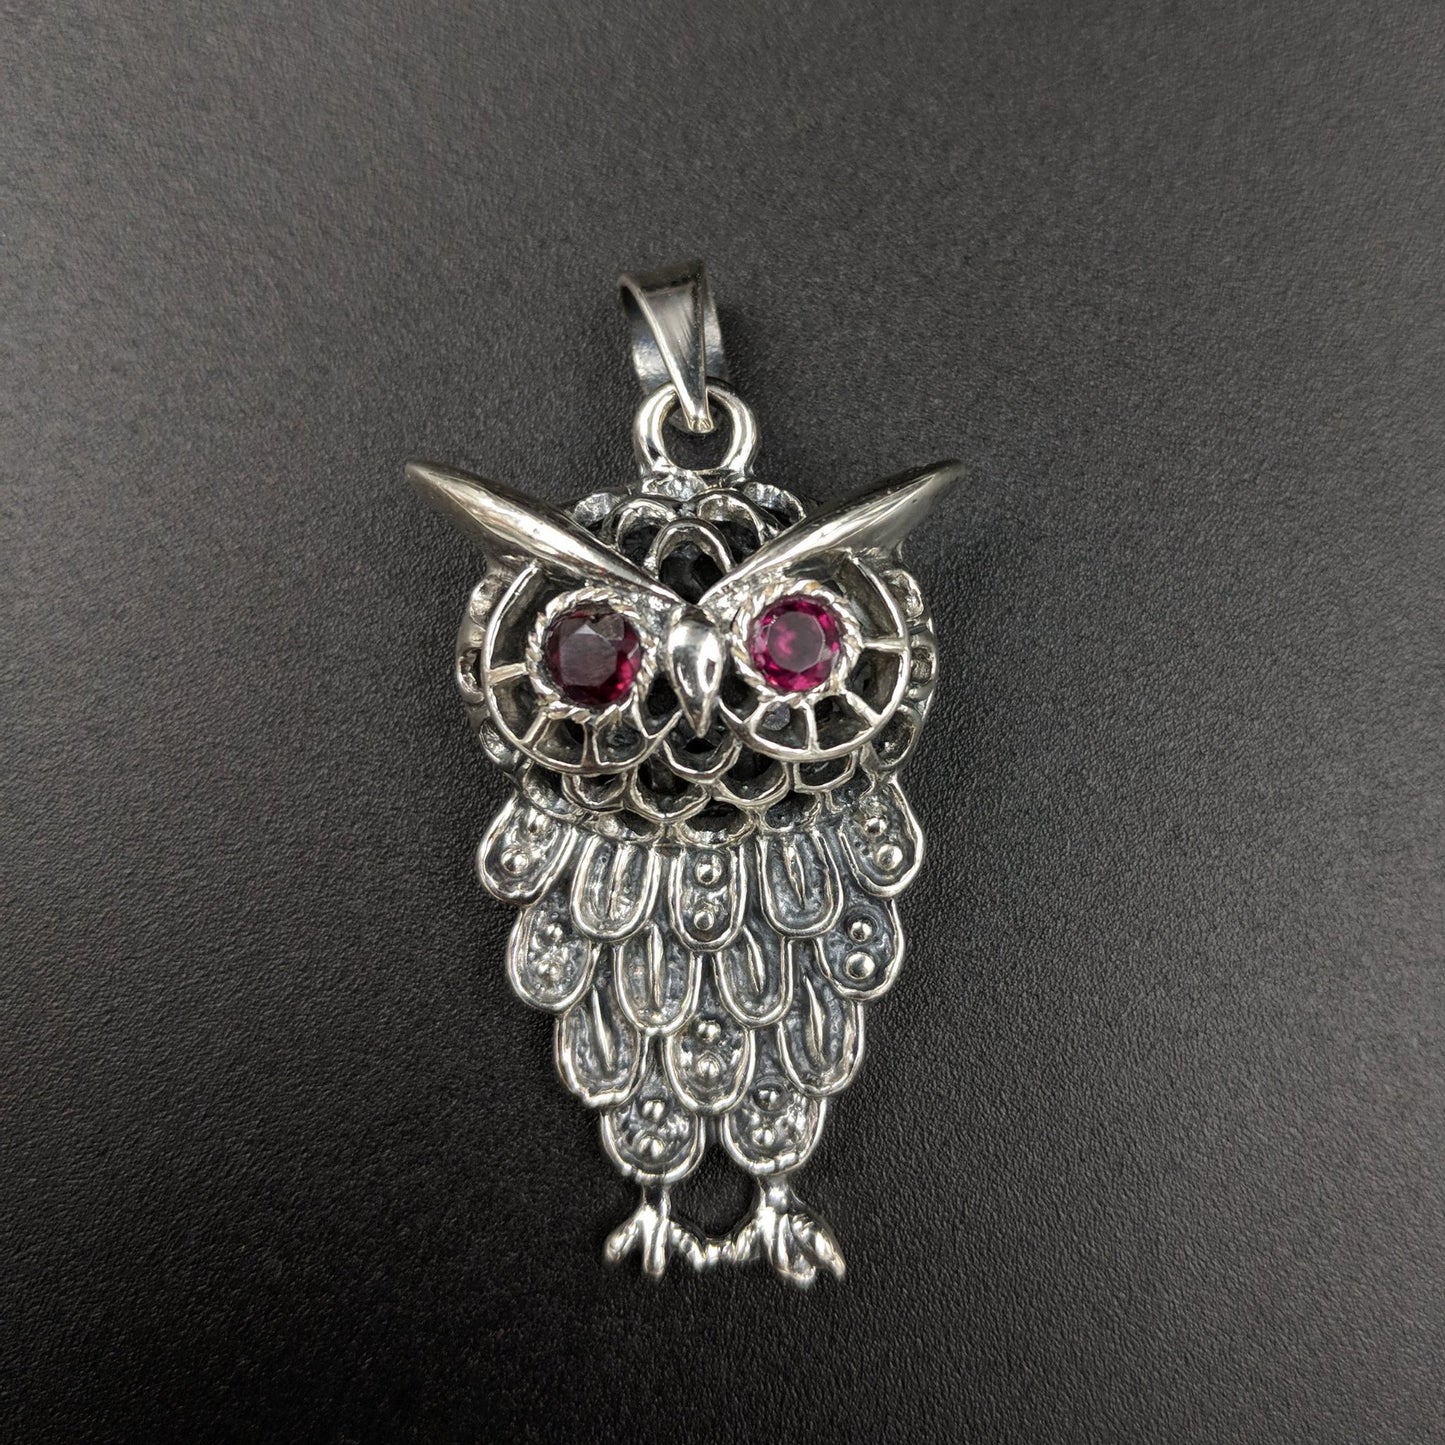 Shining Owl Pendant with Silver Chain